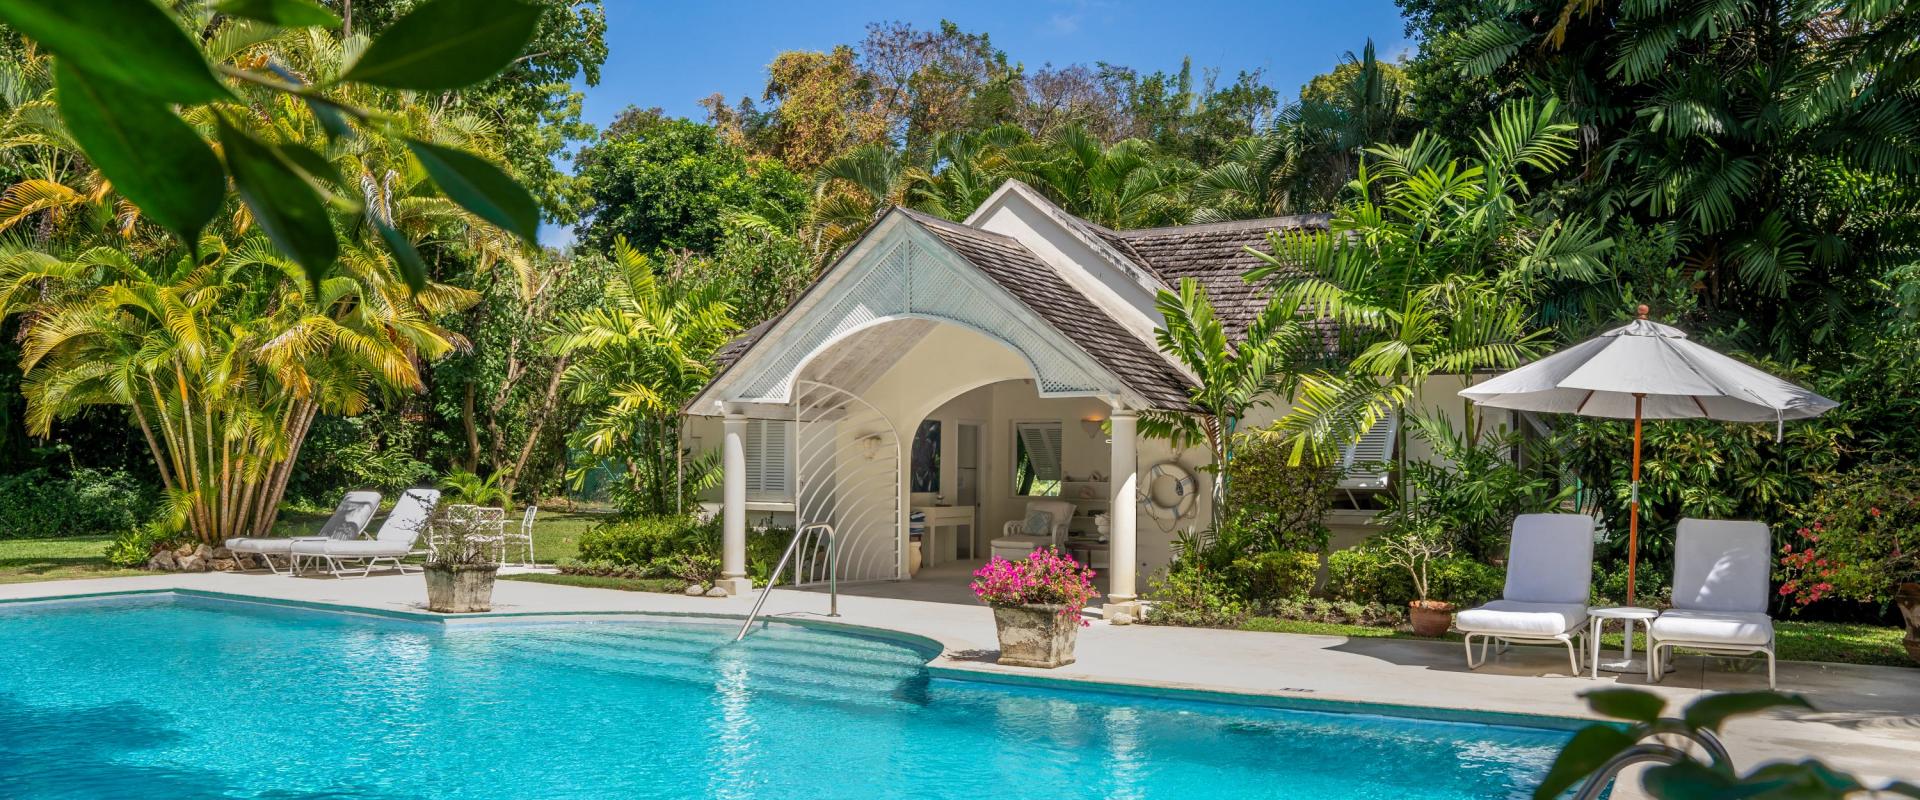 Heronetta Sandy Lane Estate Barbados Pool and Pool House View from Garden